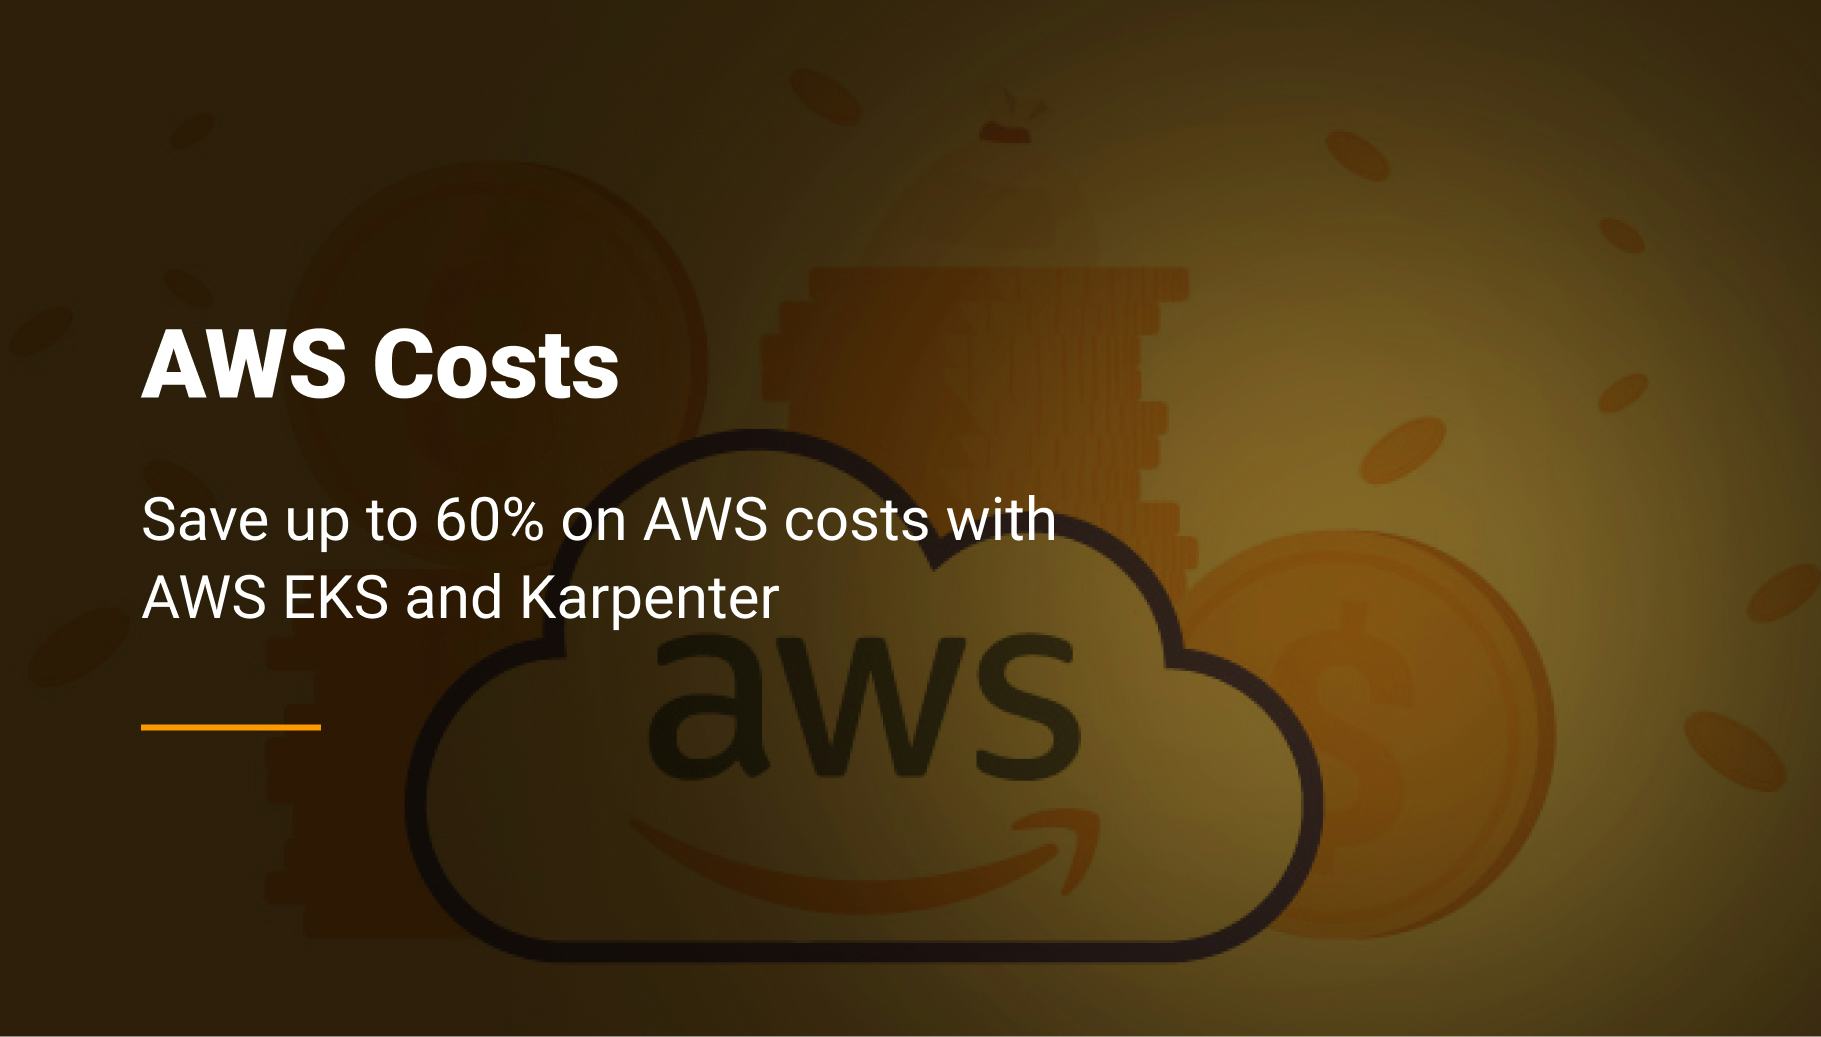 Save up to 60% on AWS costs with EKS and Karpenter - Qovery